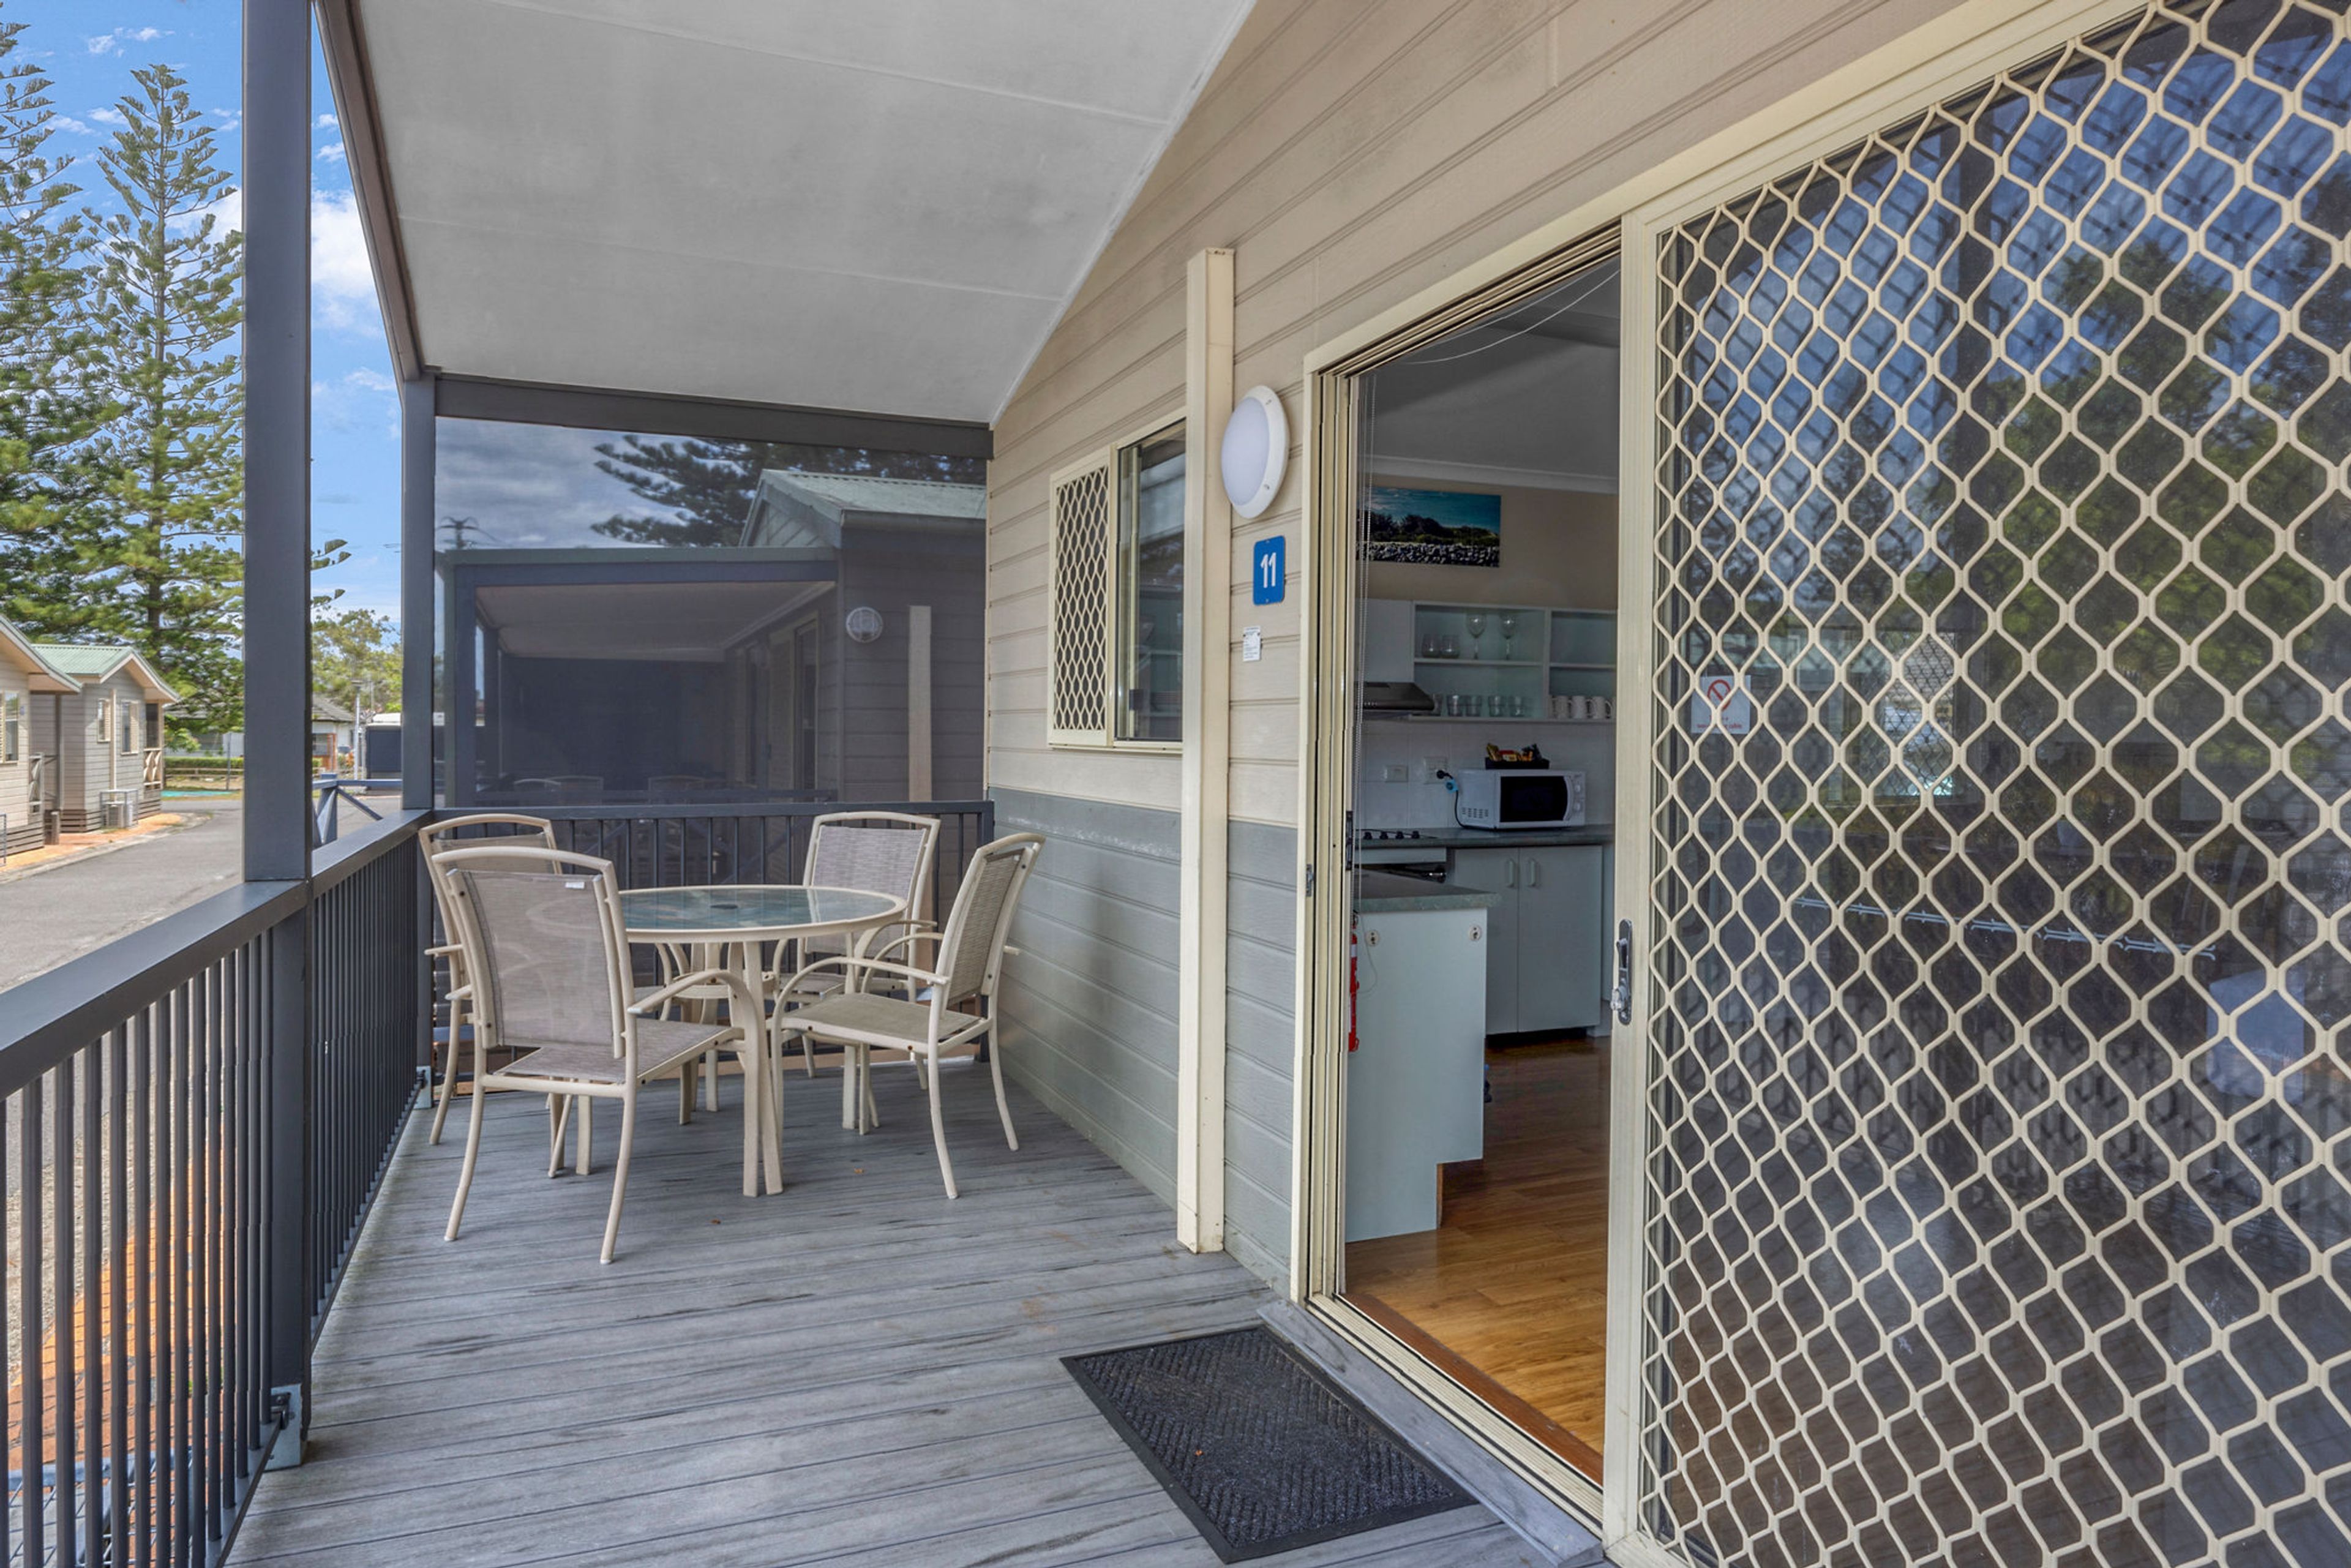 Tuncurry - Deluxe Cabin Accessible - Sleeps 4 - Do